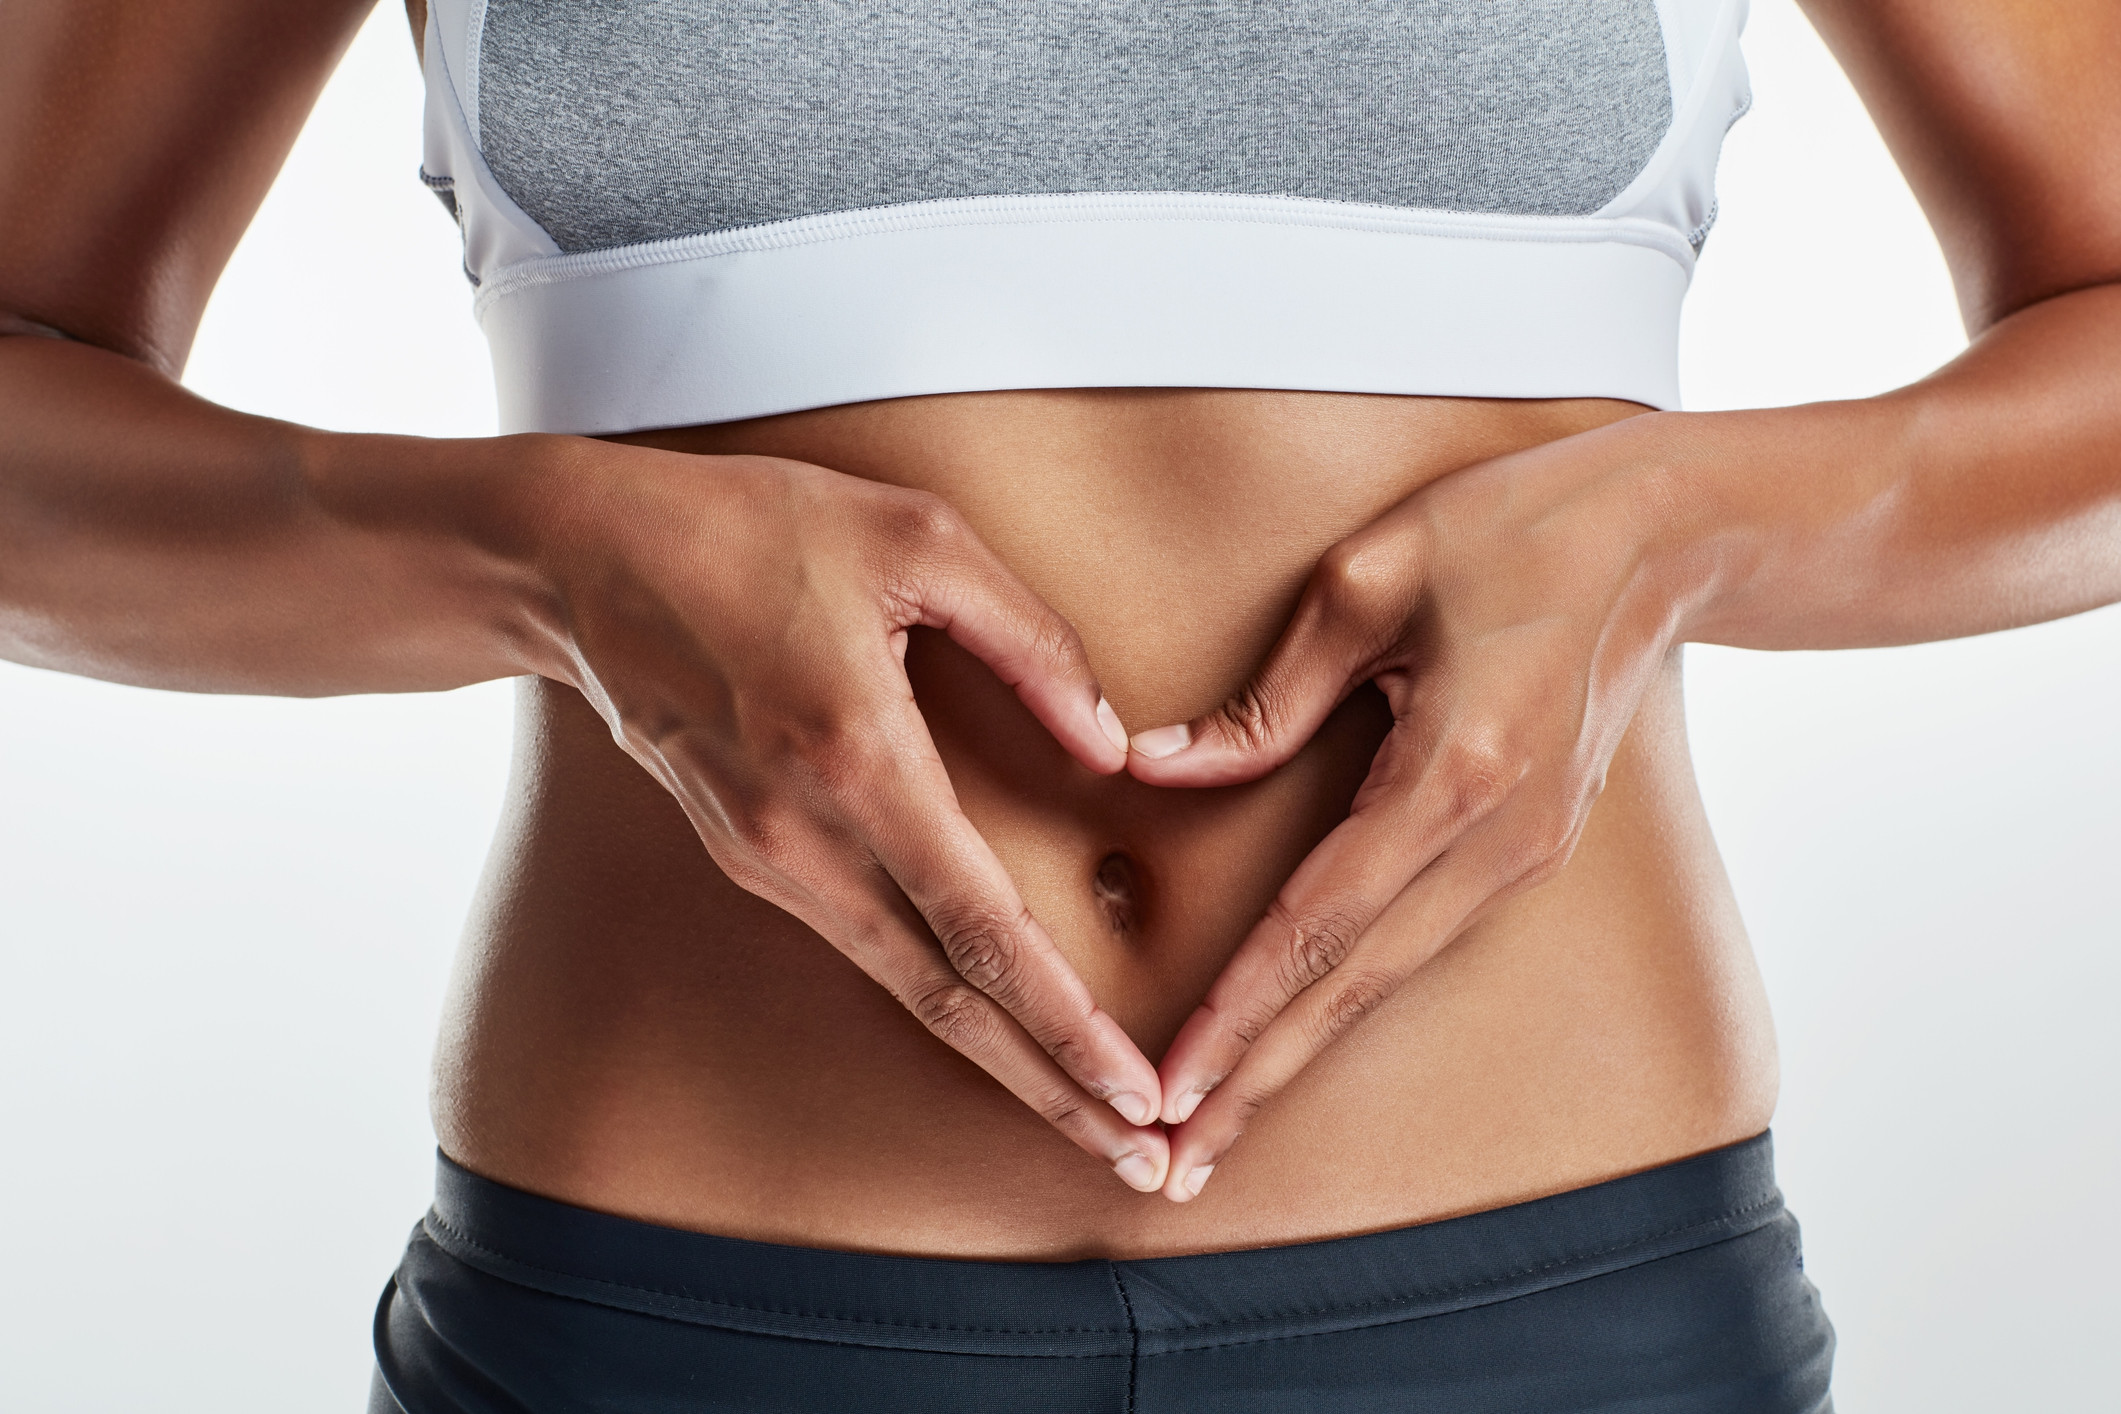 COOL SCULPTING HELP YOU SHRINK & SHAPE YOUR STOMACH